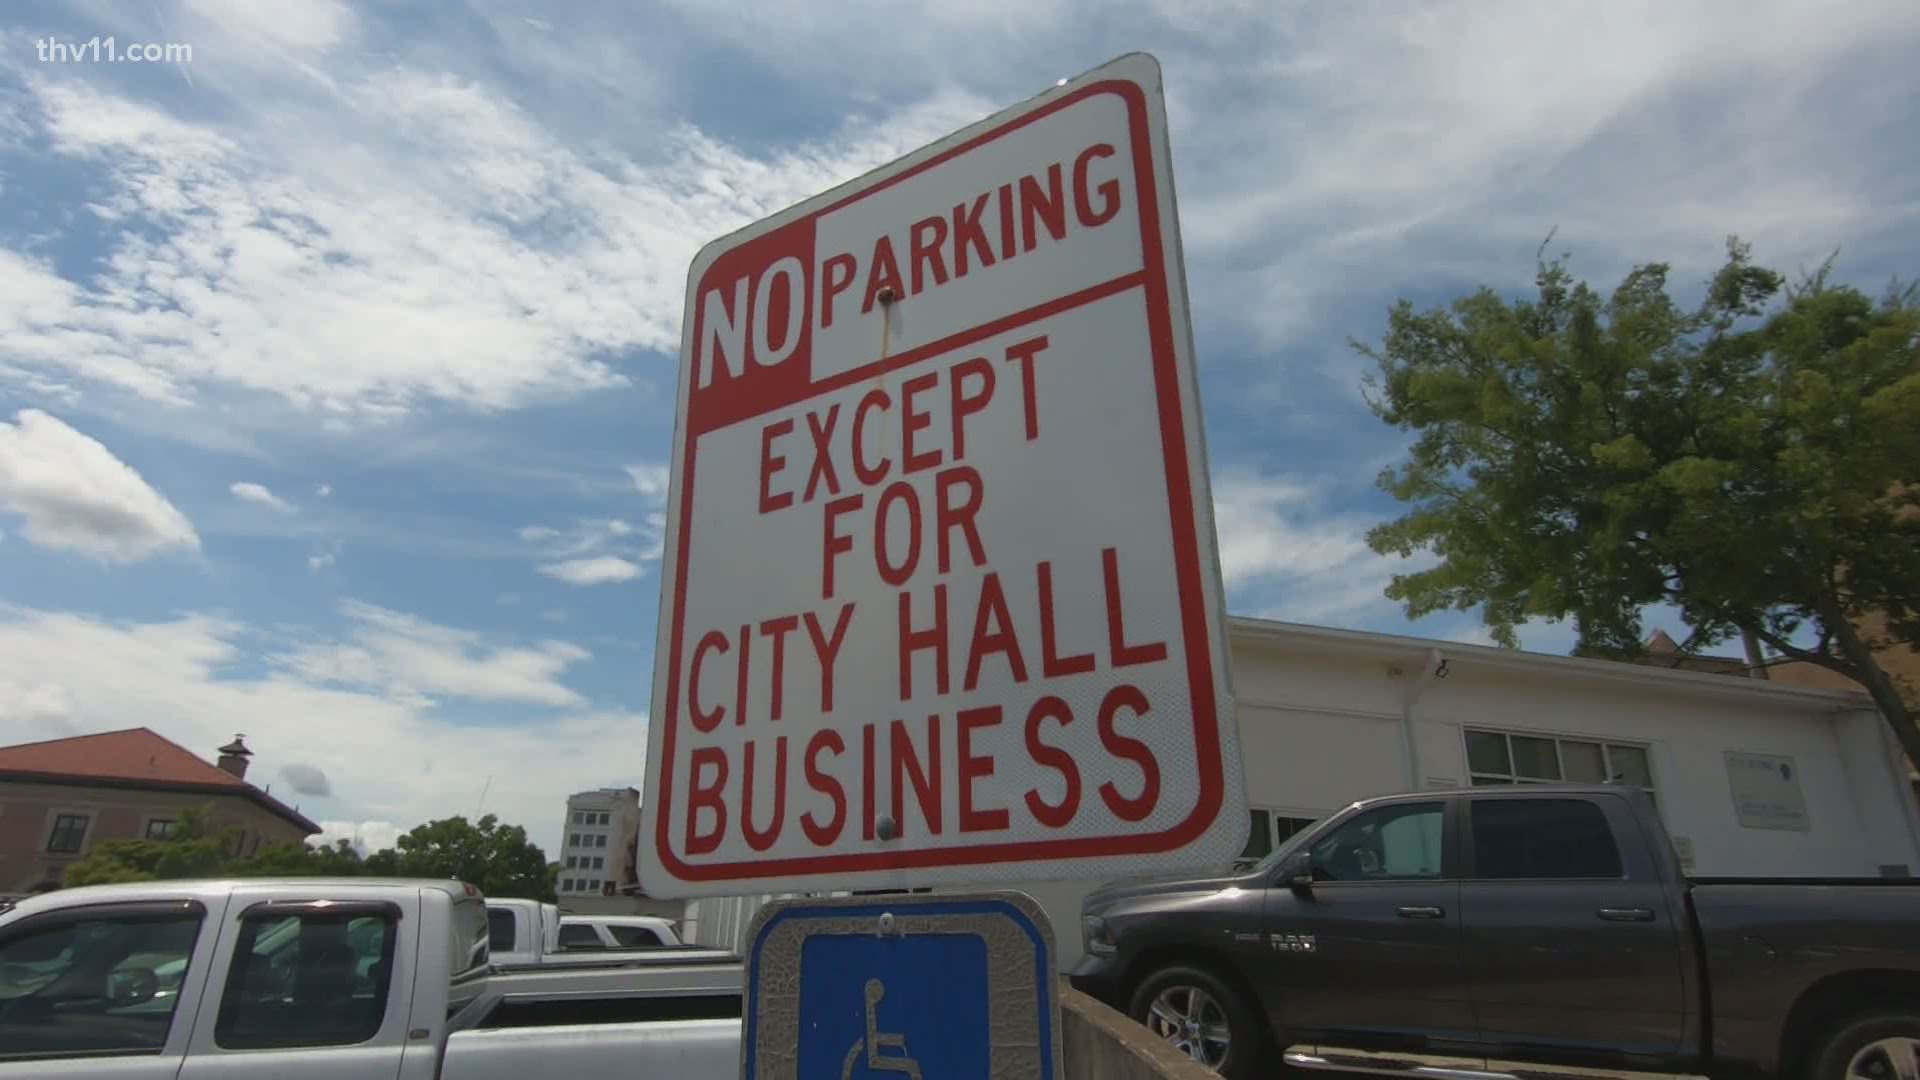 Several city workers in Hot Springs are still on the job, even though they have been put in quarantine. But they're not disobeying orders. The city let them work.